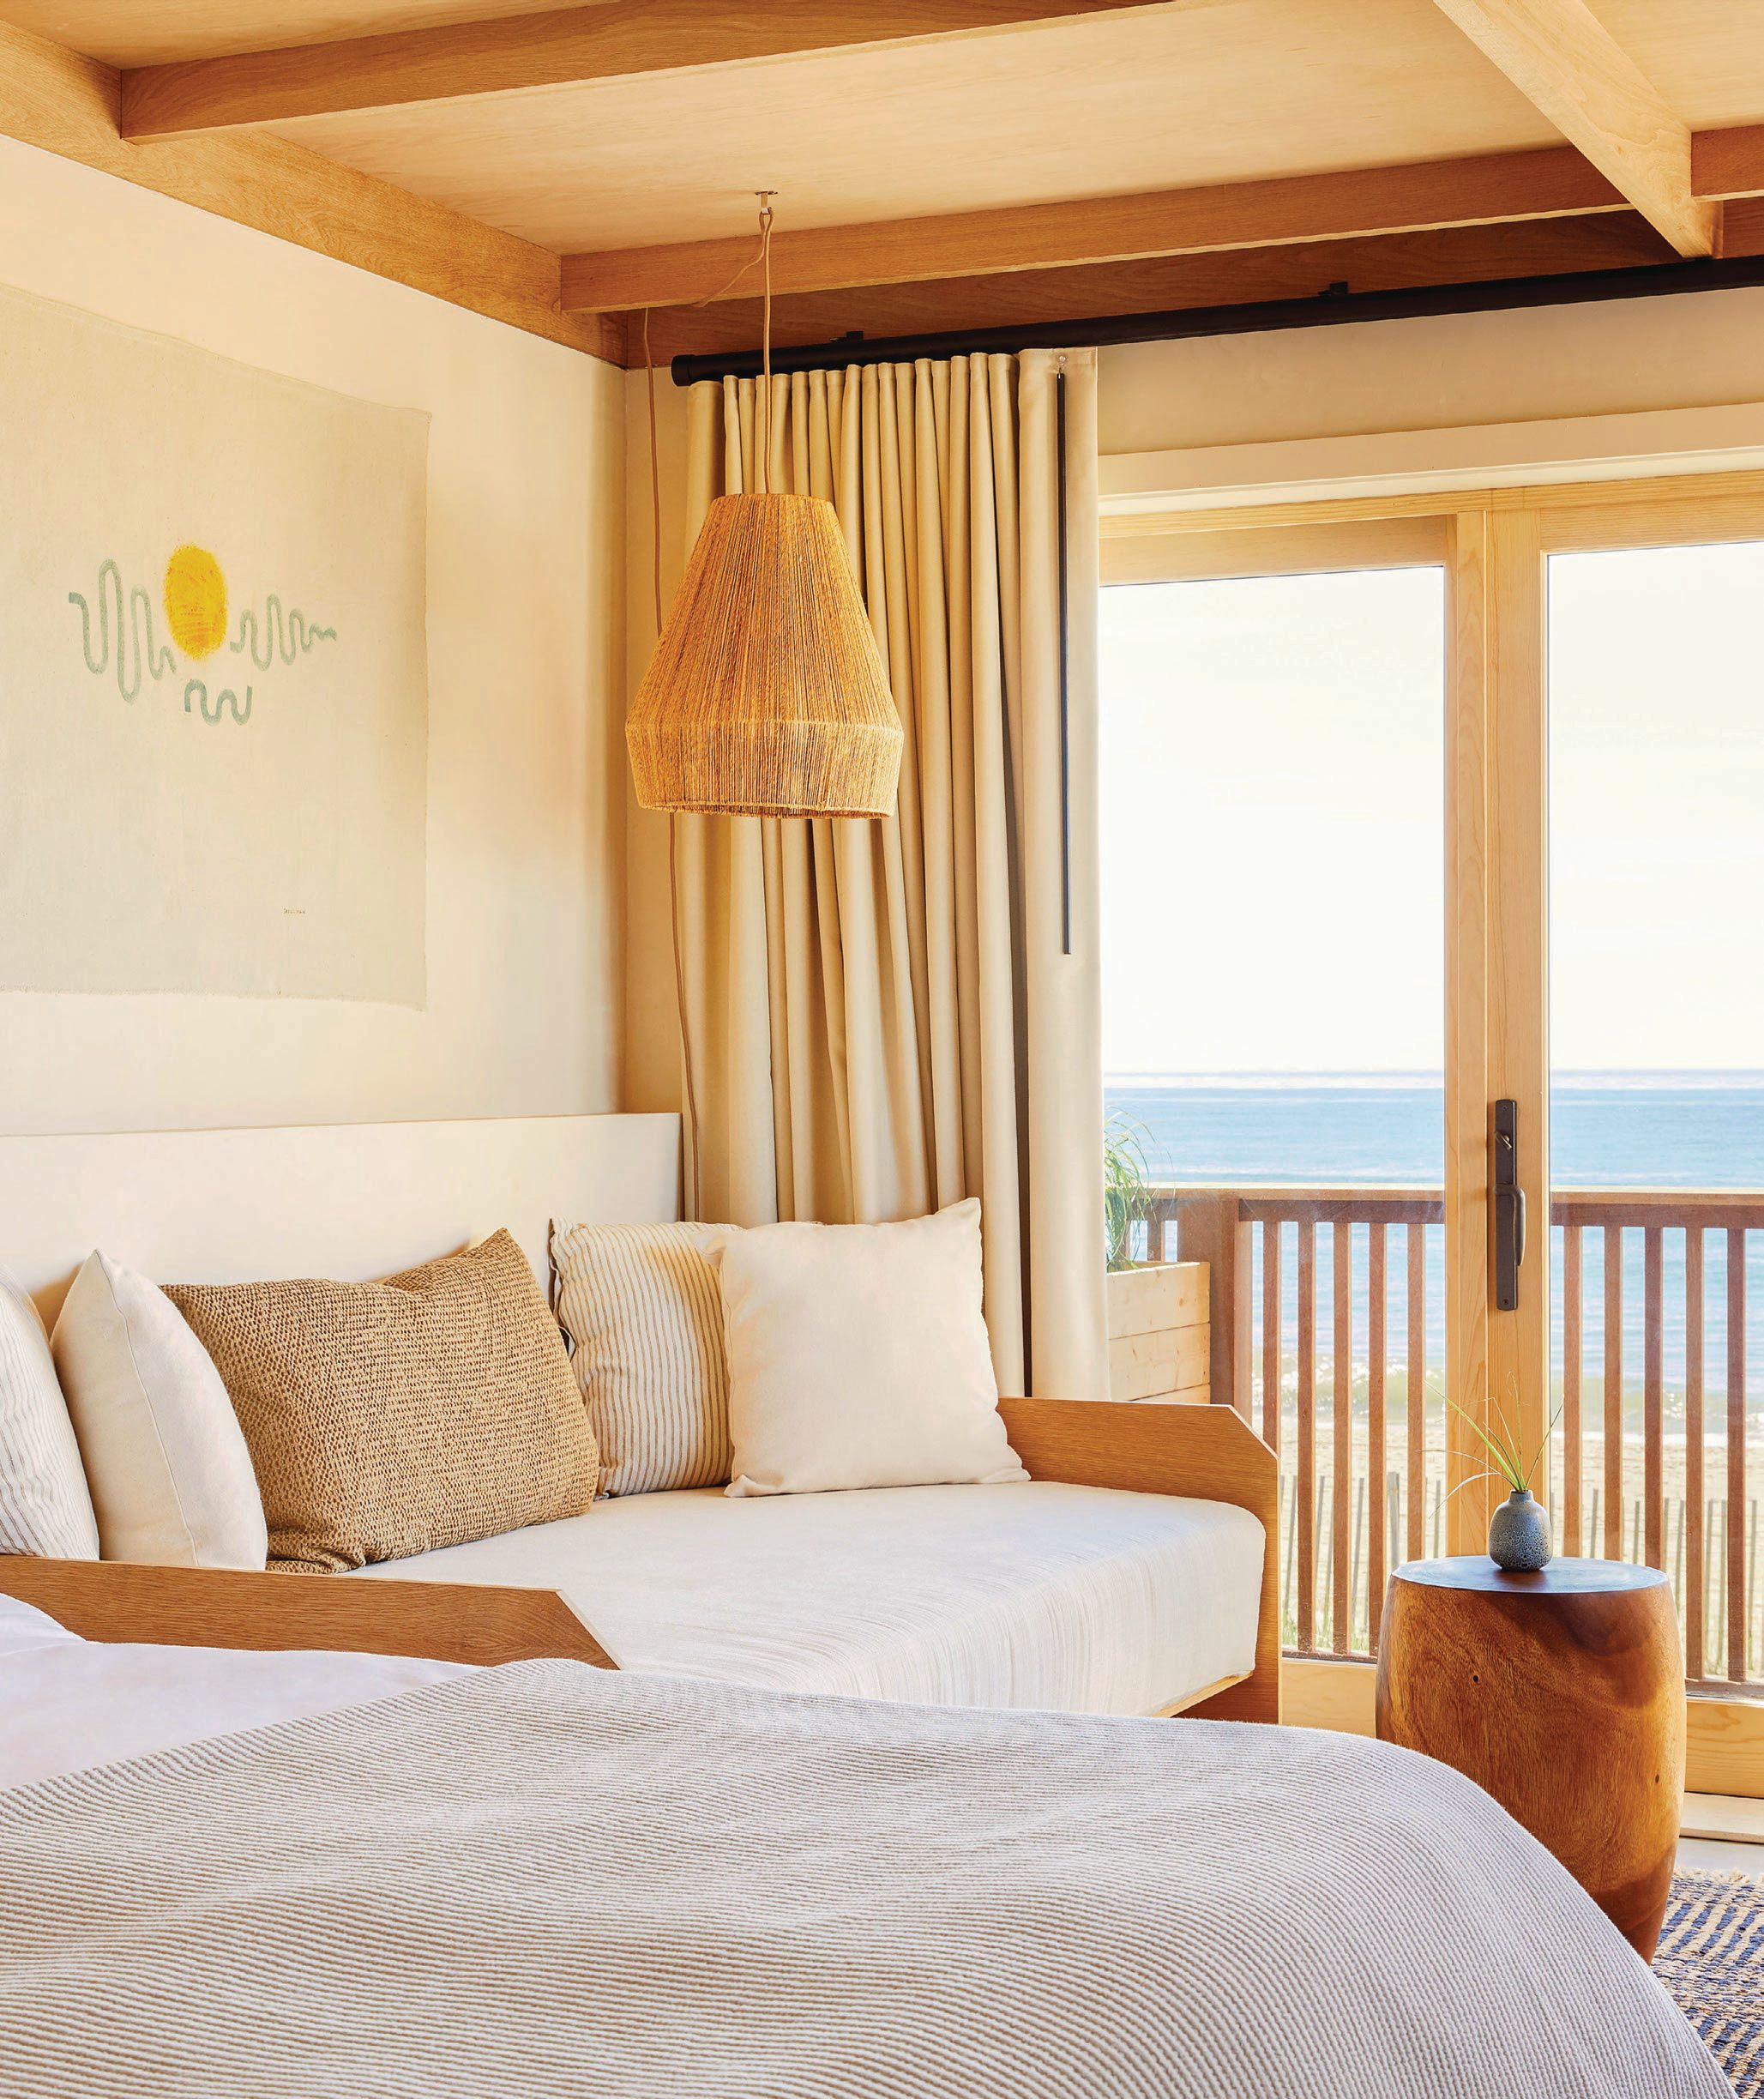 Hues of blue and green from the ocean and surrounding landscape peek through the windows, providing natural light to all of the rooms and suites. PHOTO BY HEIDI BRIDGE AND READ MCKENDREE